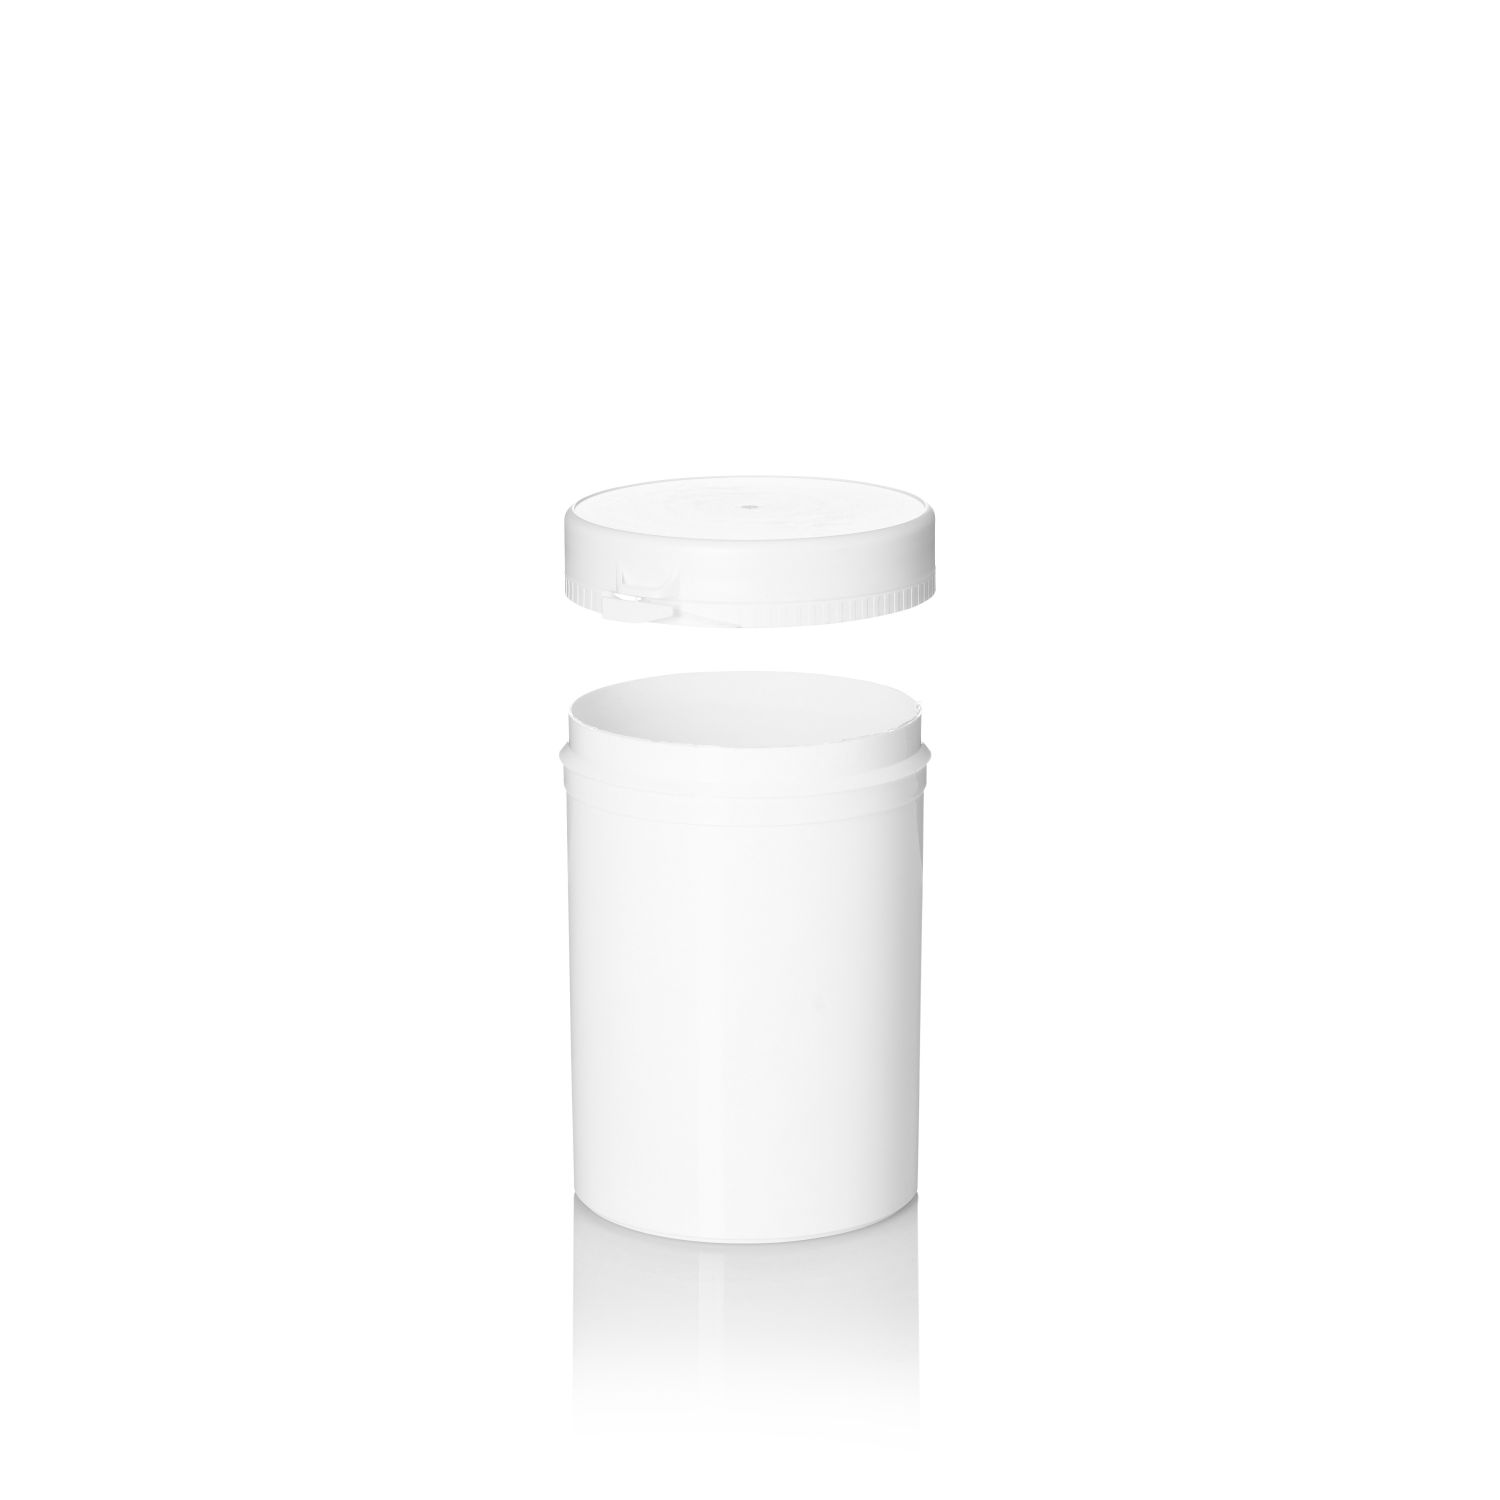 Stockists Of 450ml White PP Tamper Evident Snapsecure Jar